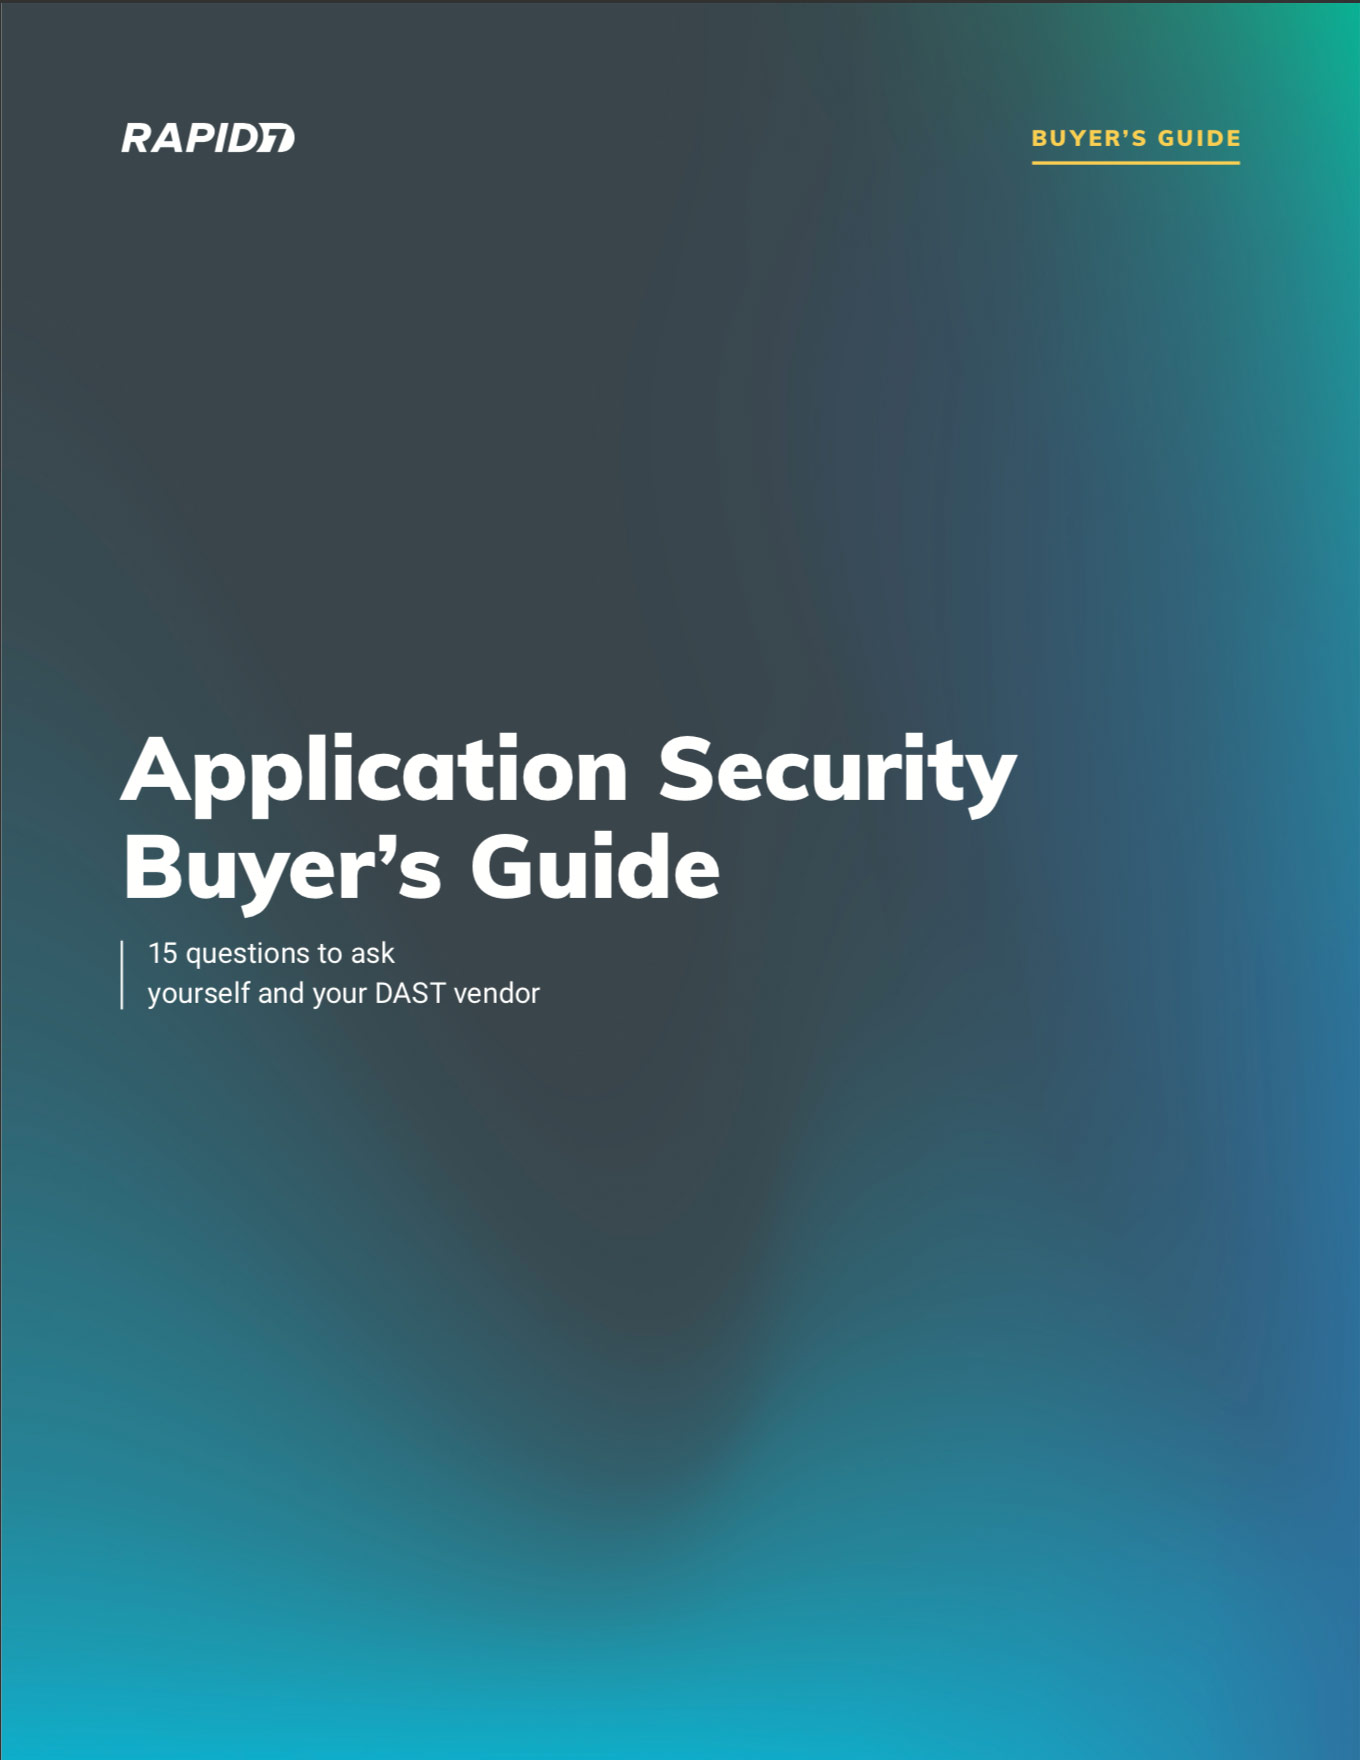 Rapid7 Application Security Buyer's Guide